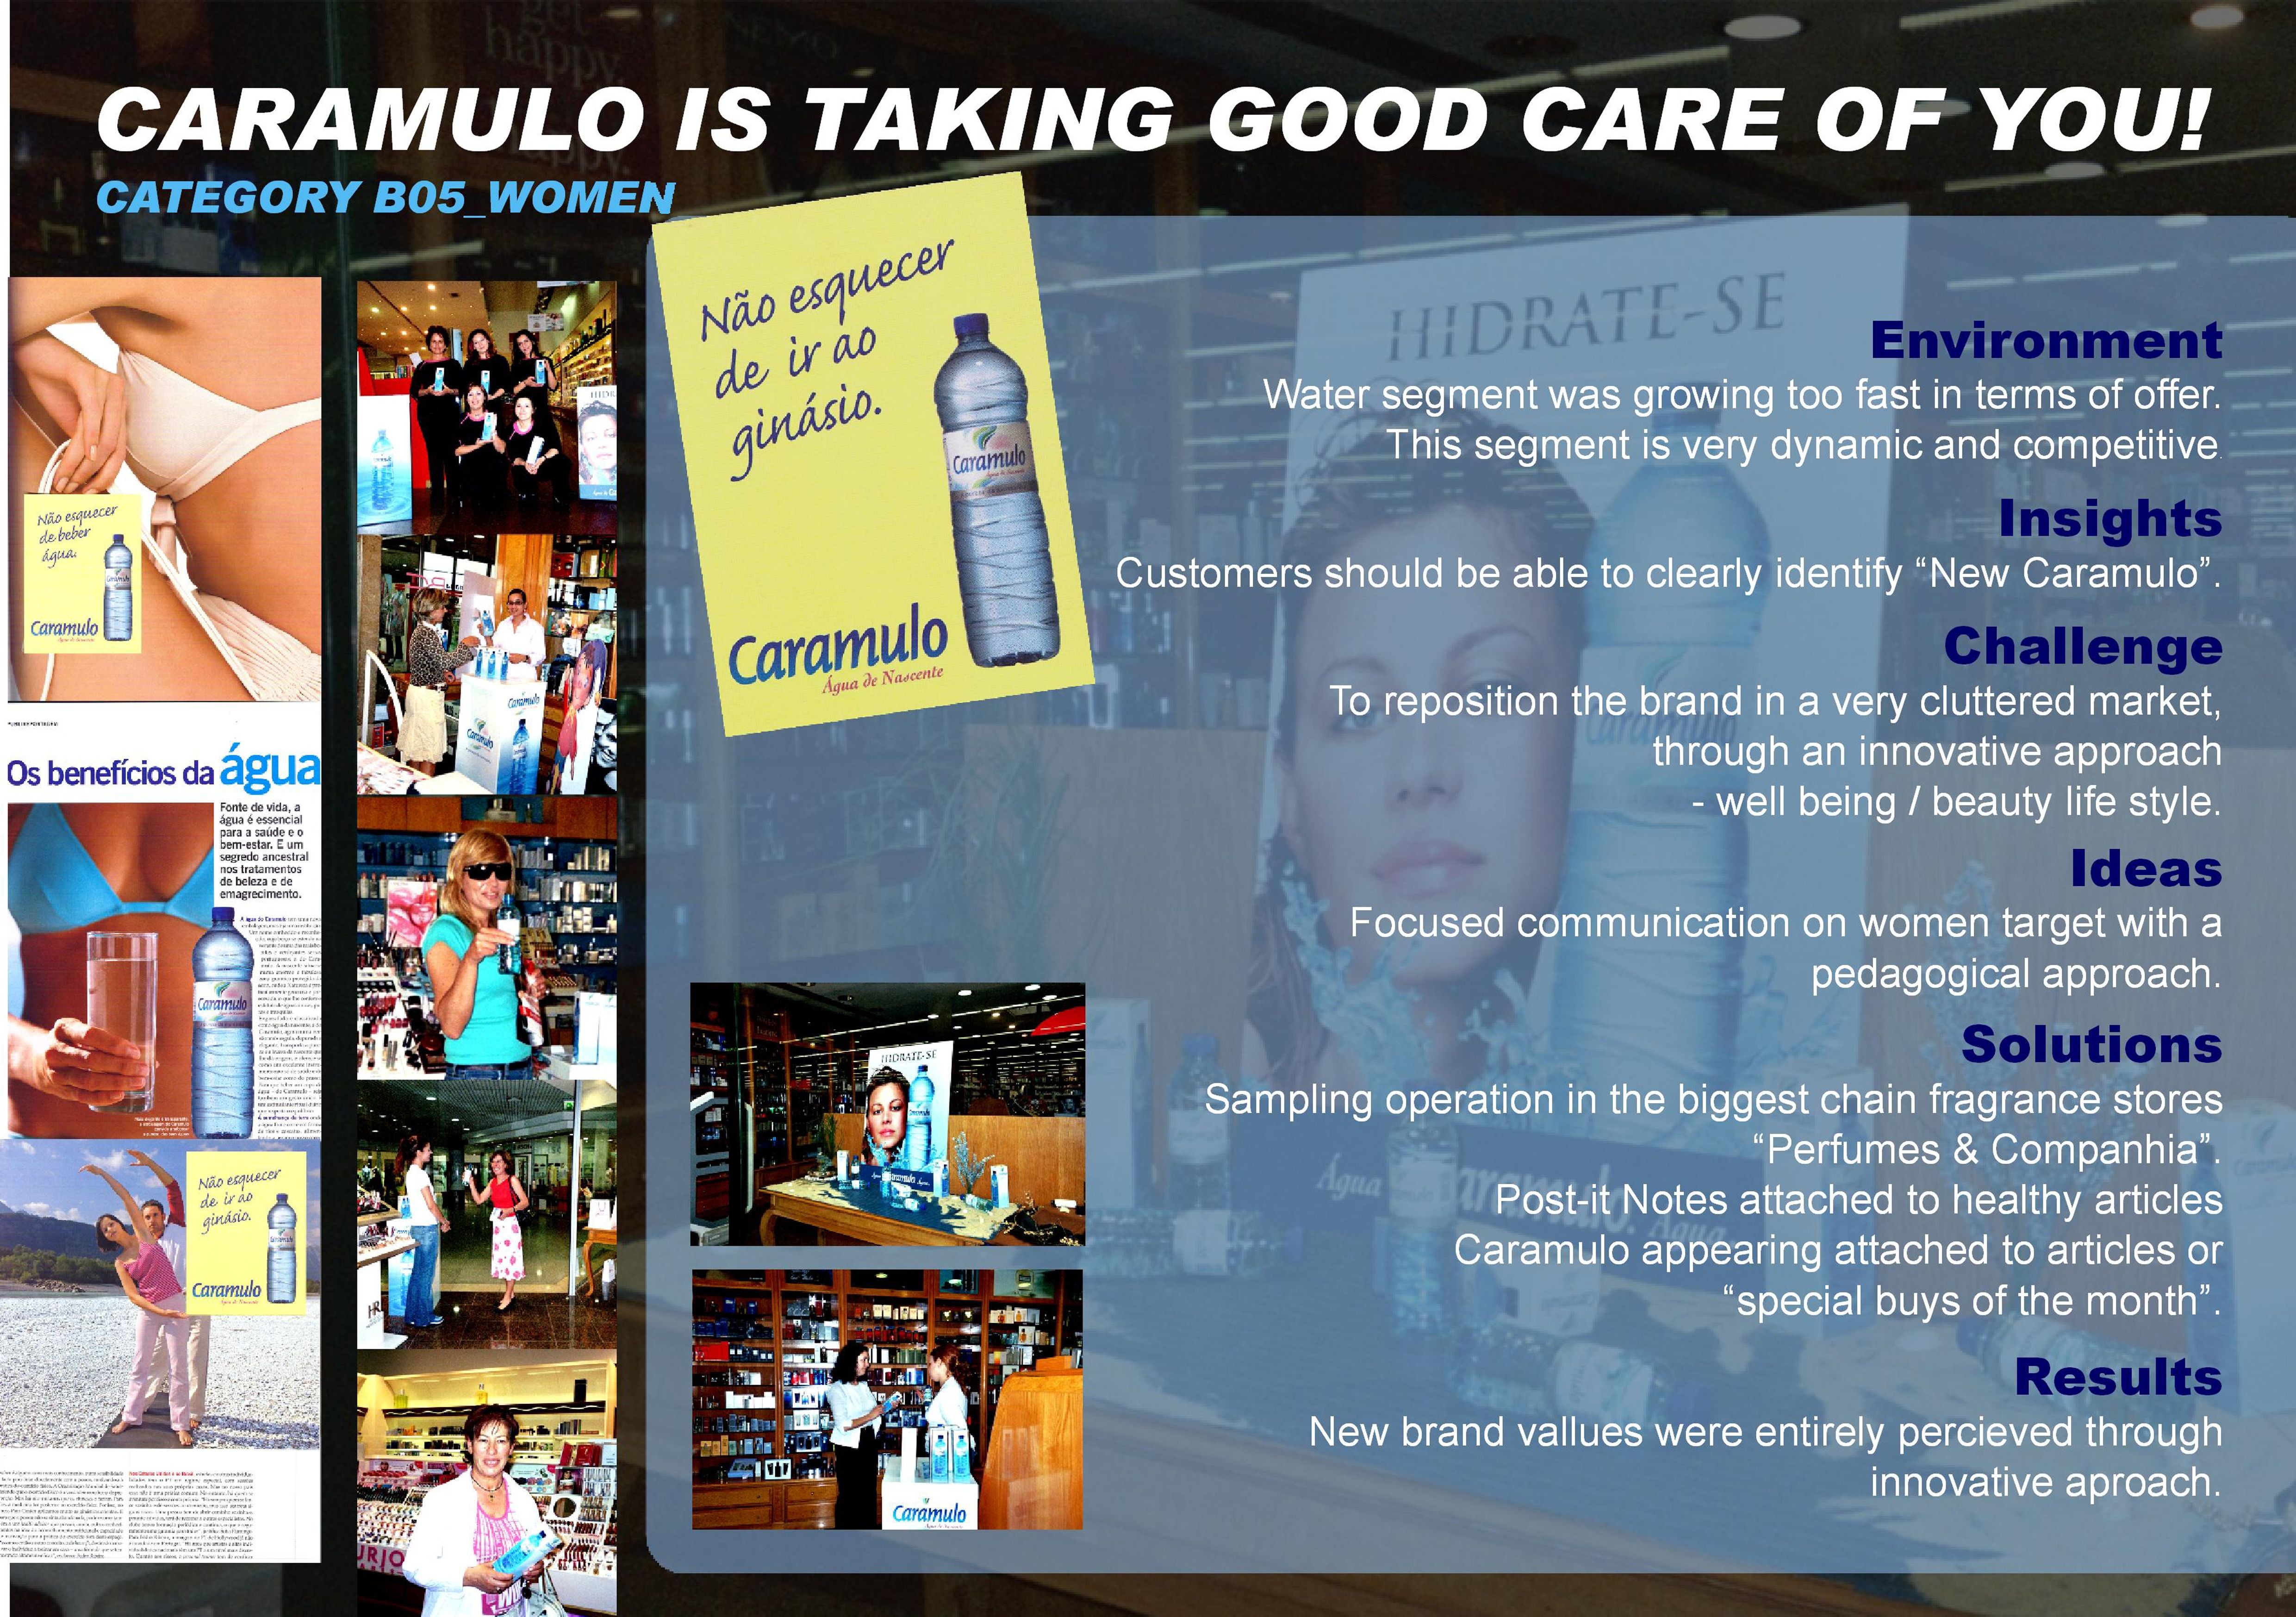 CARAMULO IS TAKING GOOD CARE OF YOU